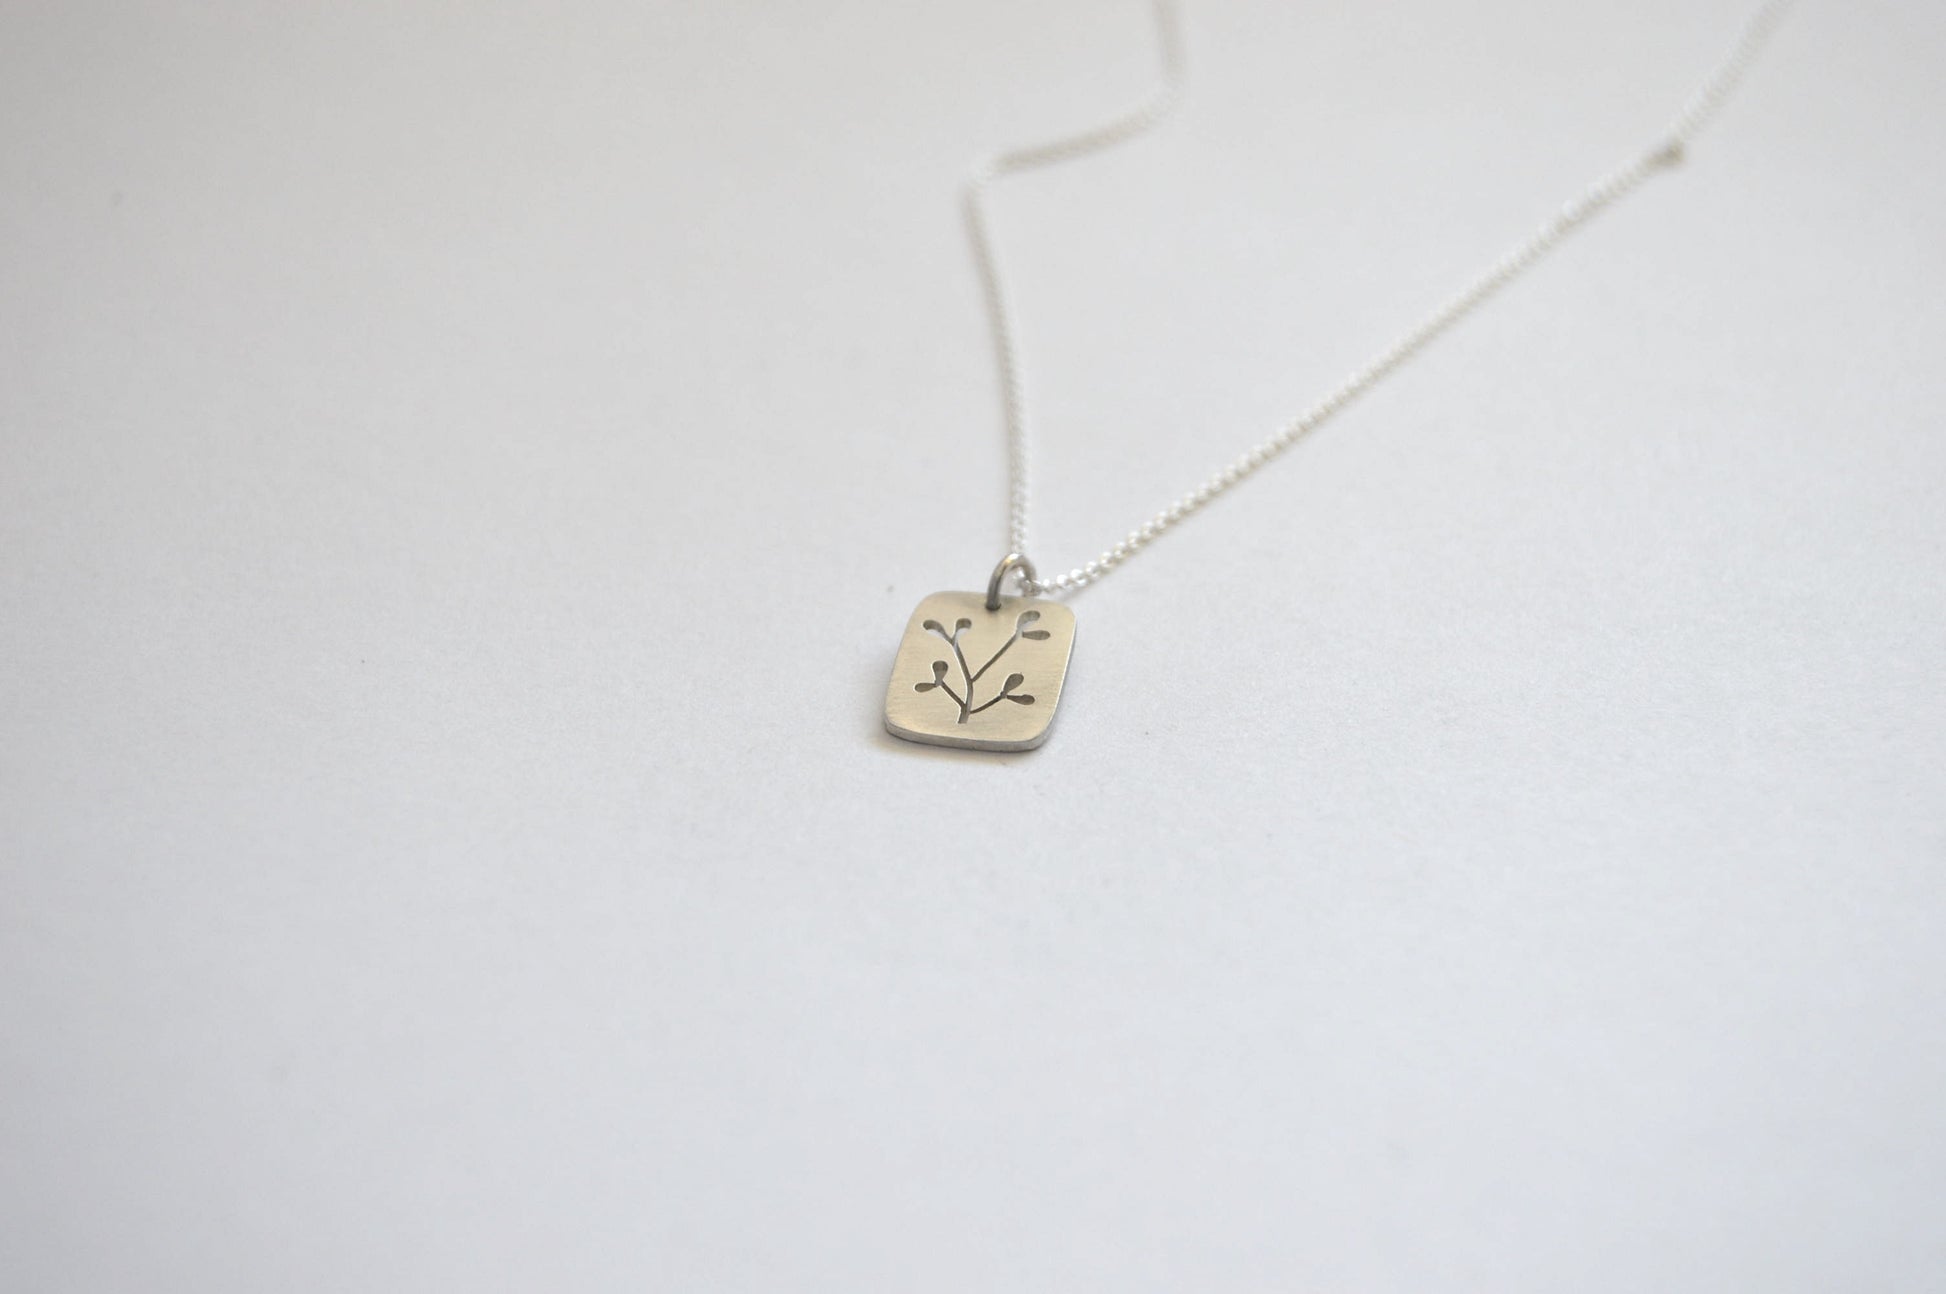  Botanical Collection Pendant with Botanical cut-out inspired by budding trees